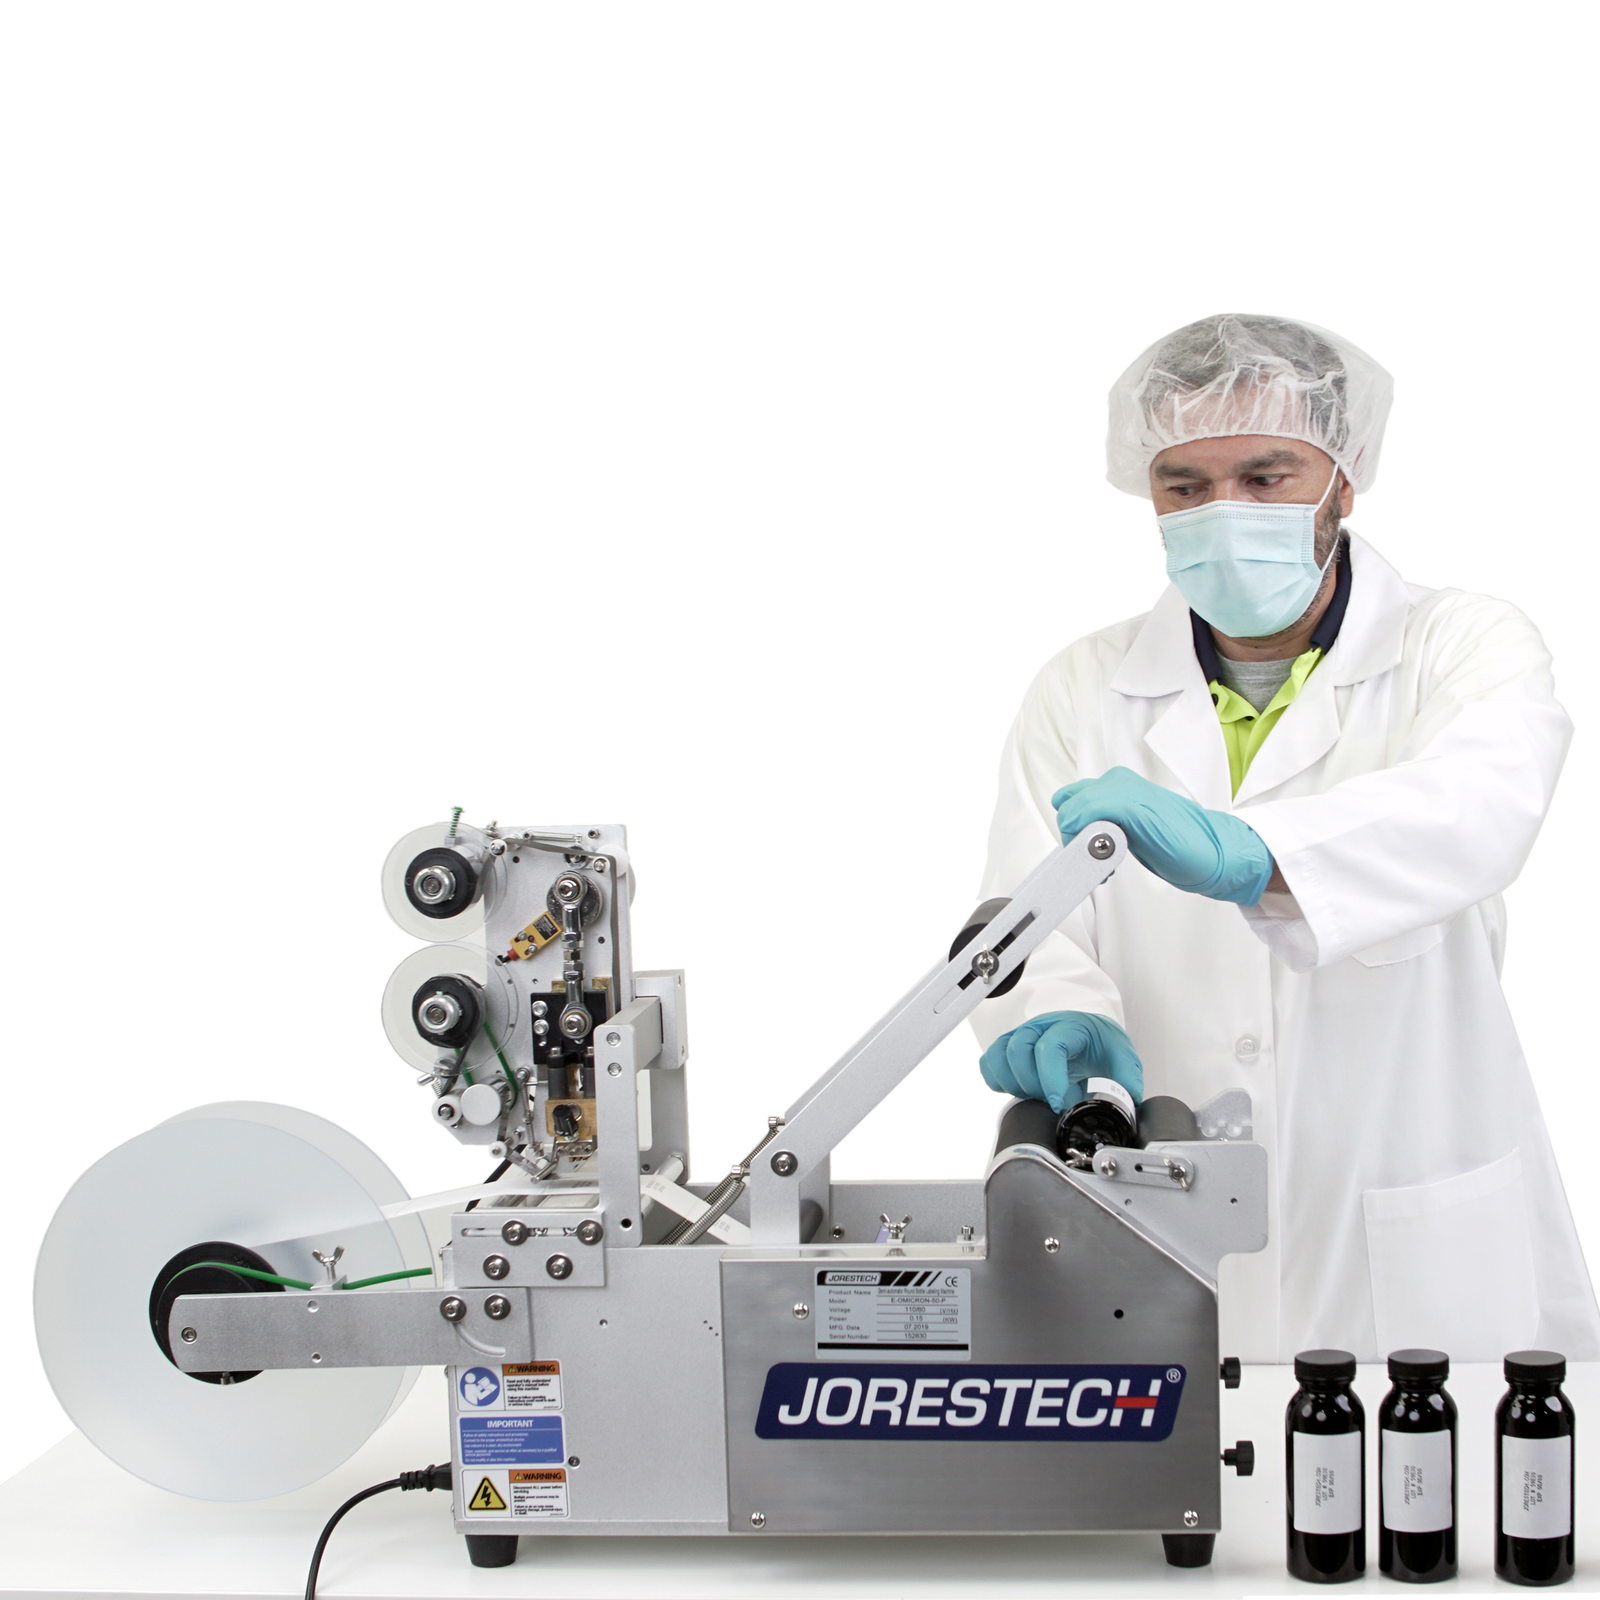 A man wearing personal protection equipment. He is operating the Jorestech semi automatic labeling machine by applying labels to round containers. A set of 3 bottles is shown with printed labels with written information